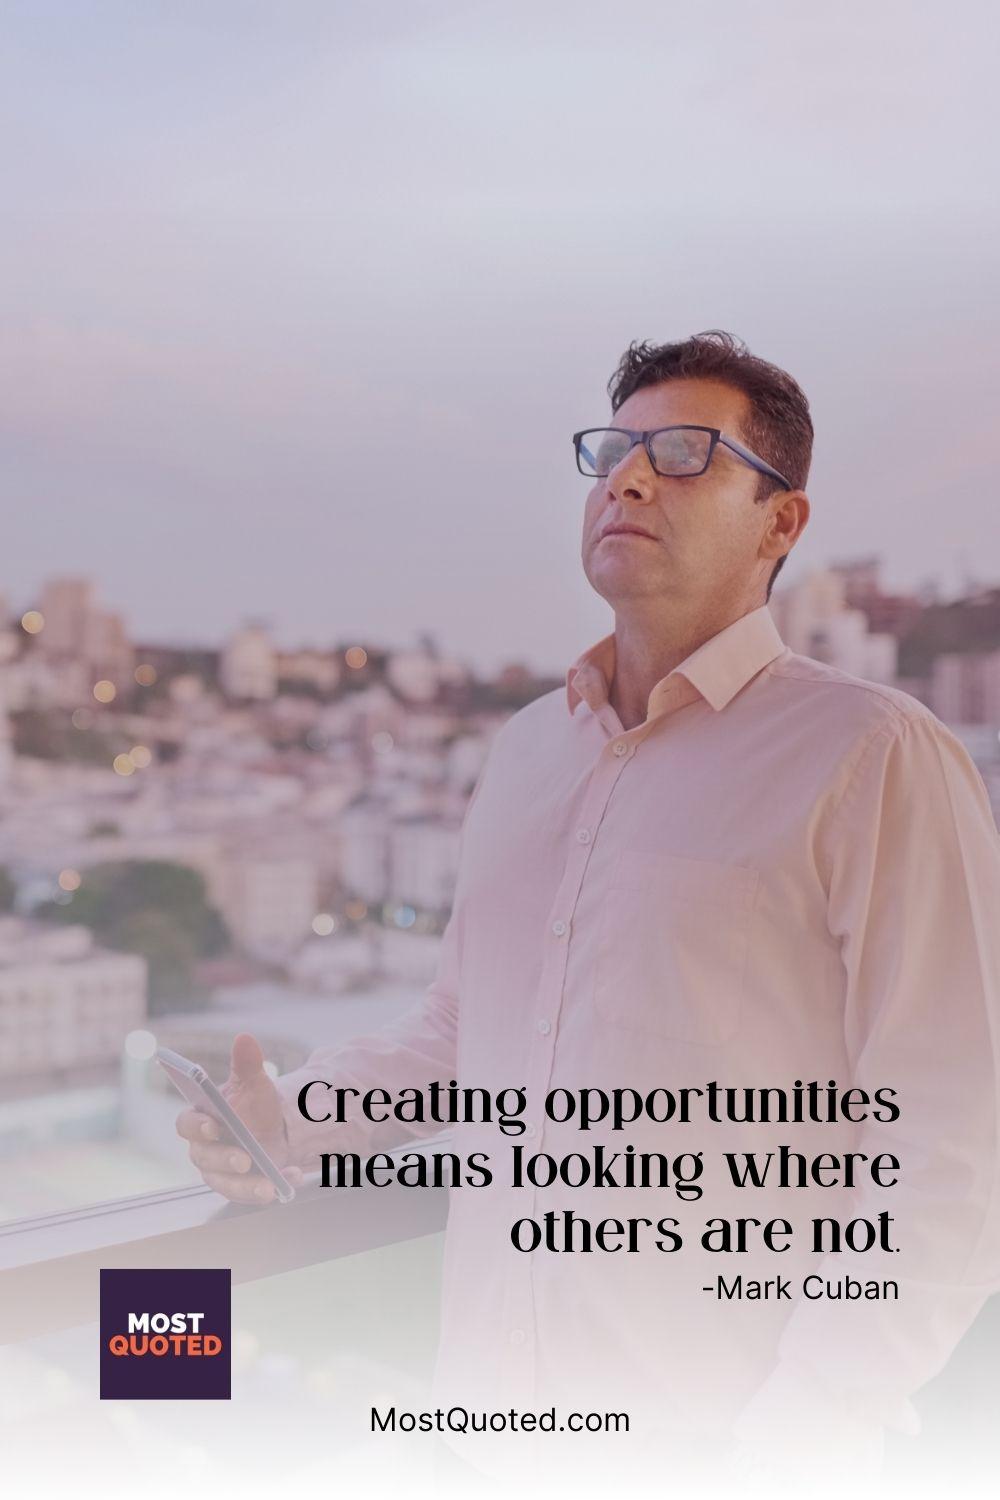 Creating opportunities means looking where others are not. - Mark Cuban